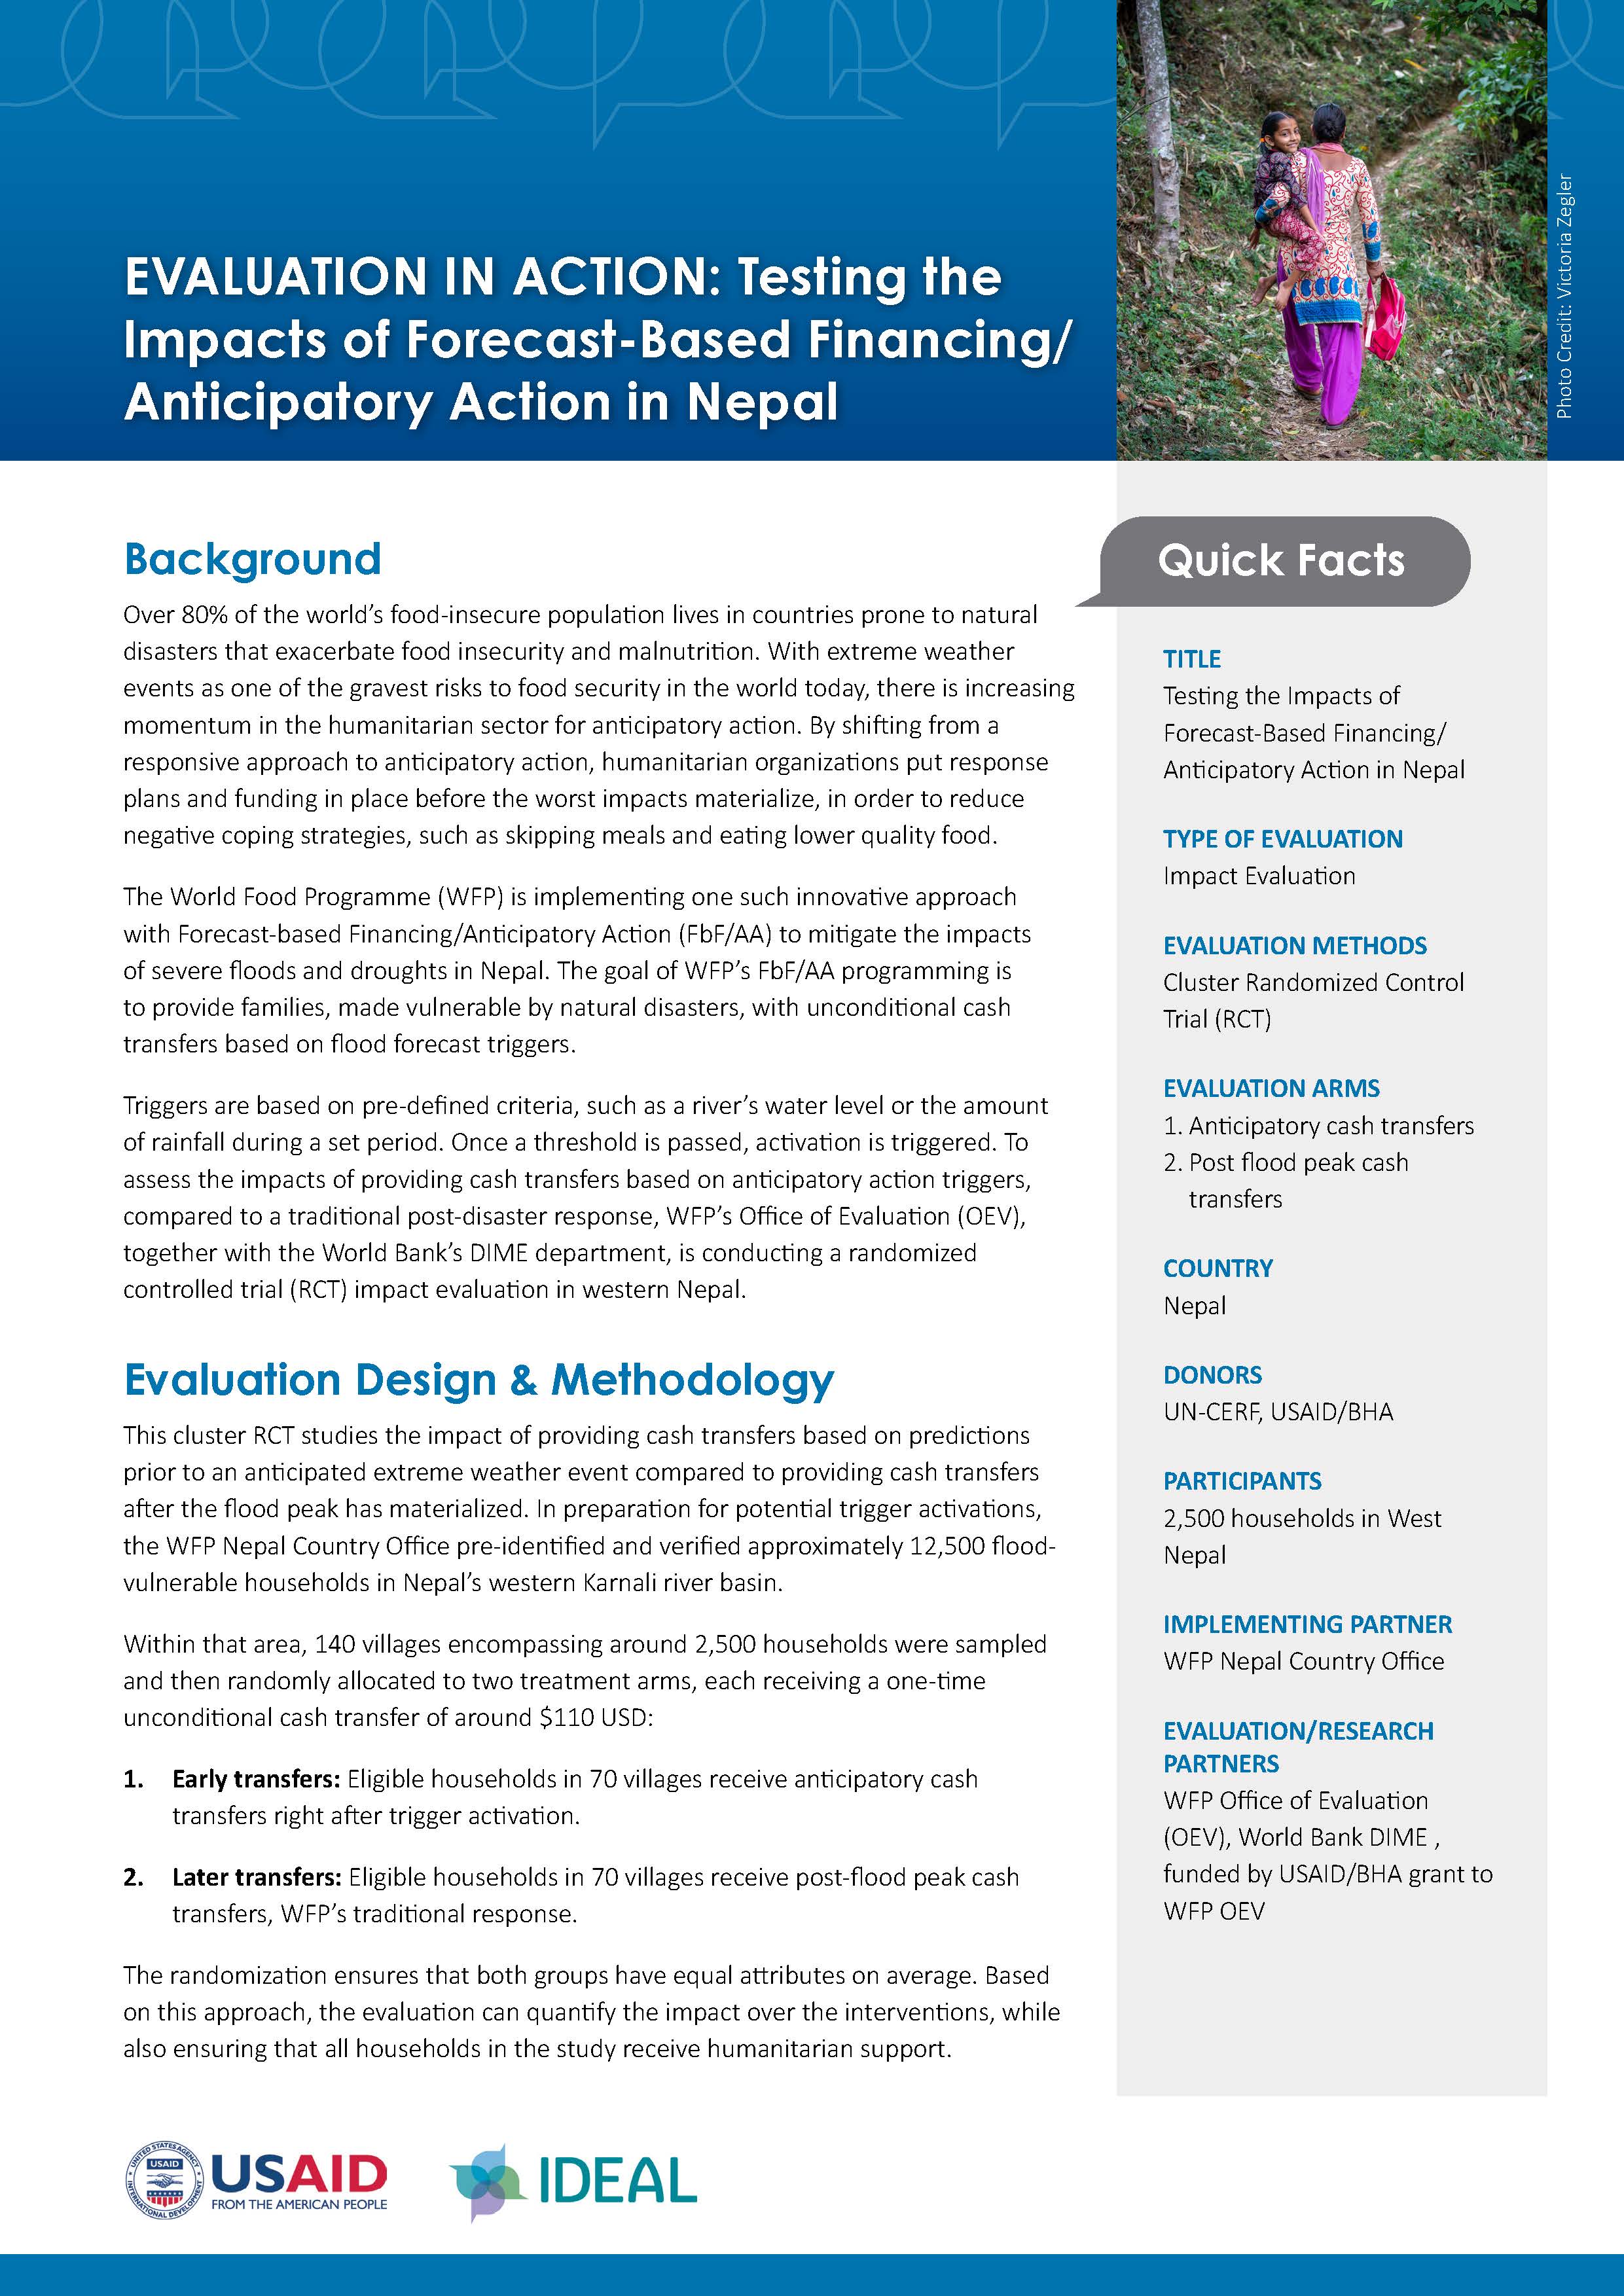 Coverage image for the Evaluation in Action Brief is the first page of the two page brief, shows a preview, with the header including a picture of a woman and child in Nepal